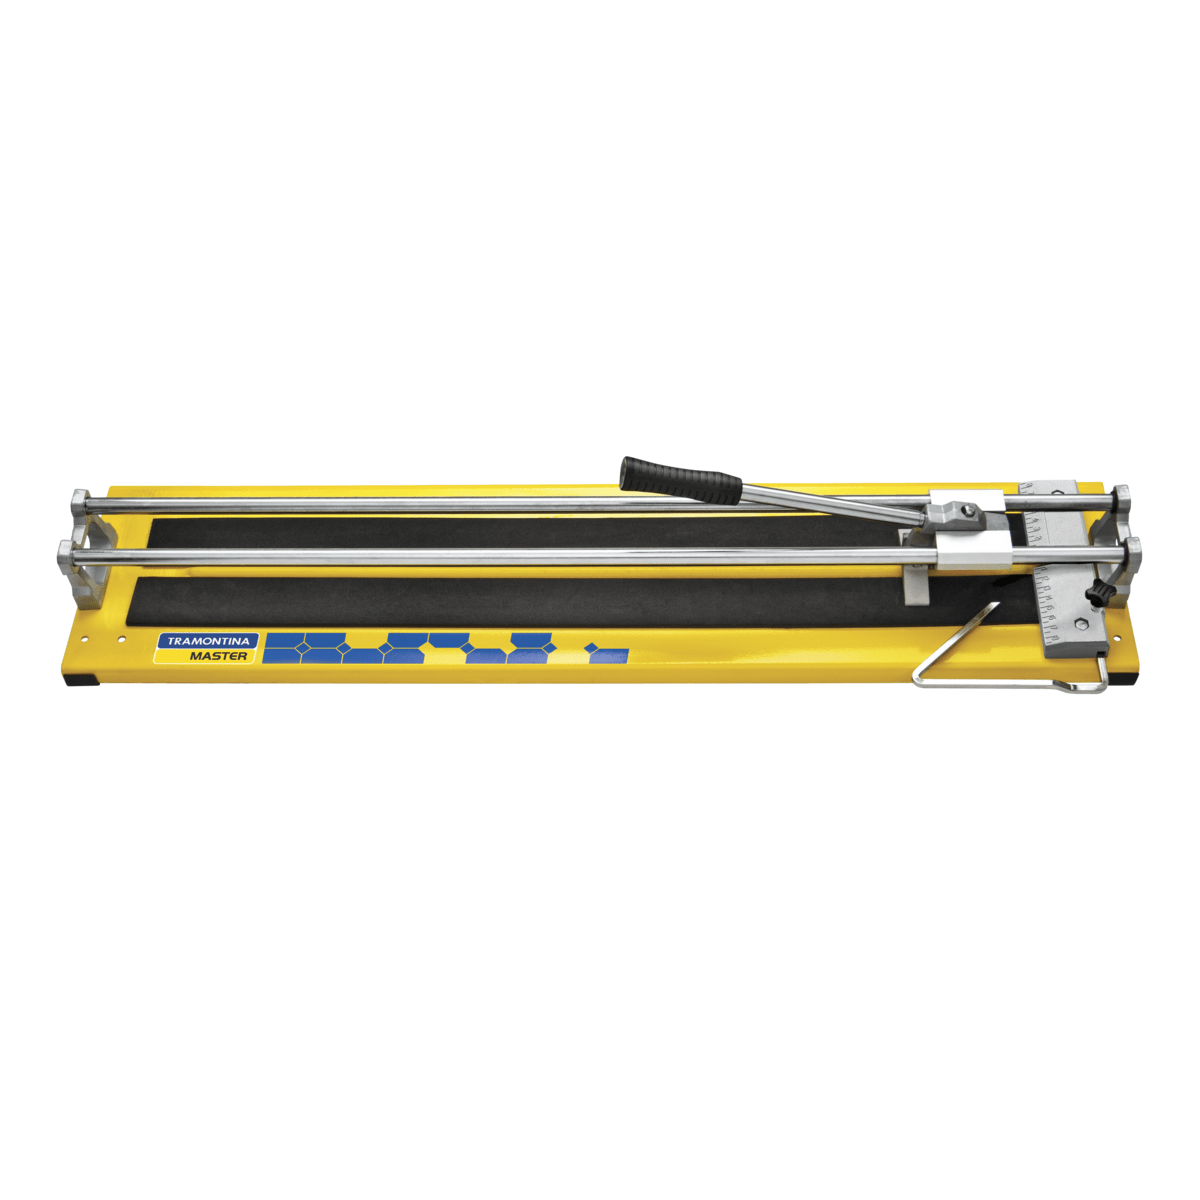 Tramontina 500mm Floor and Tile Cutter | Supply Master | Accra, Ghana Tools Building Steel Engineering Hardware tool